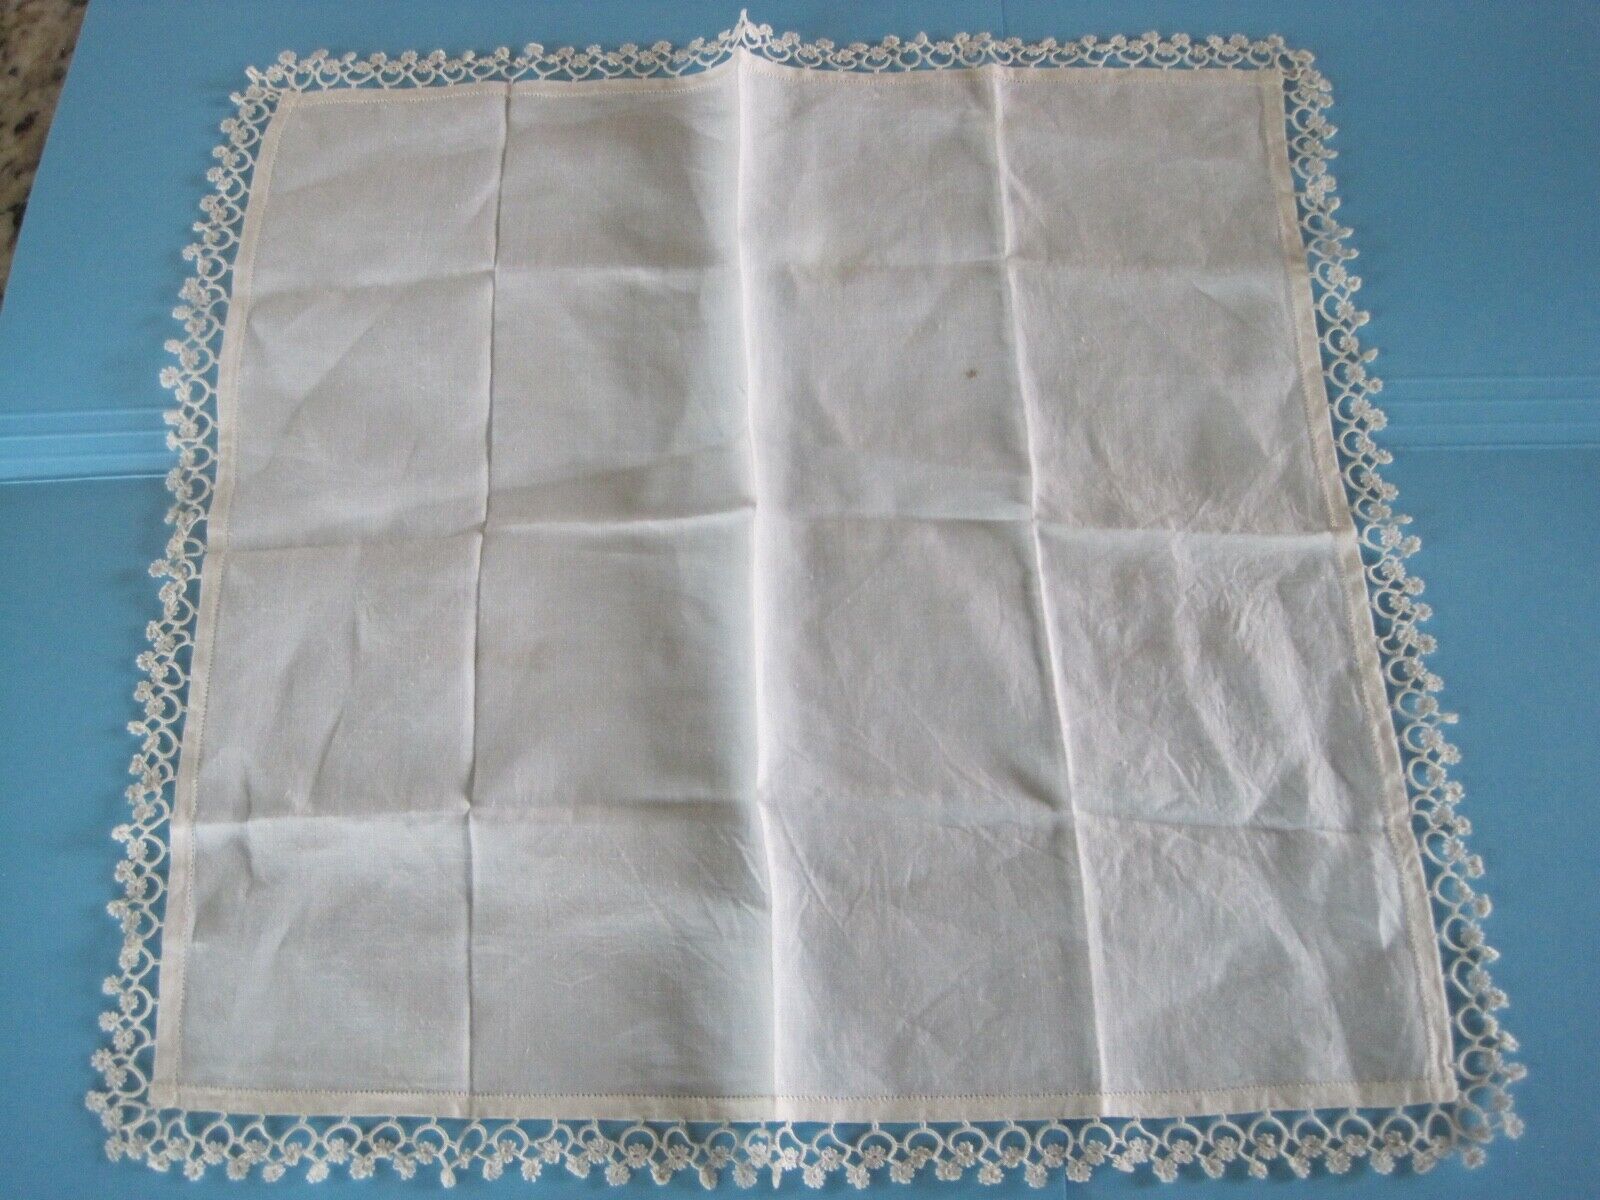 Wedding Handkerchief w/ Flower Tatted or Embroidered Edge Antique 